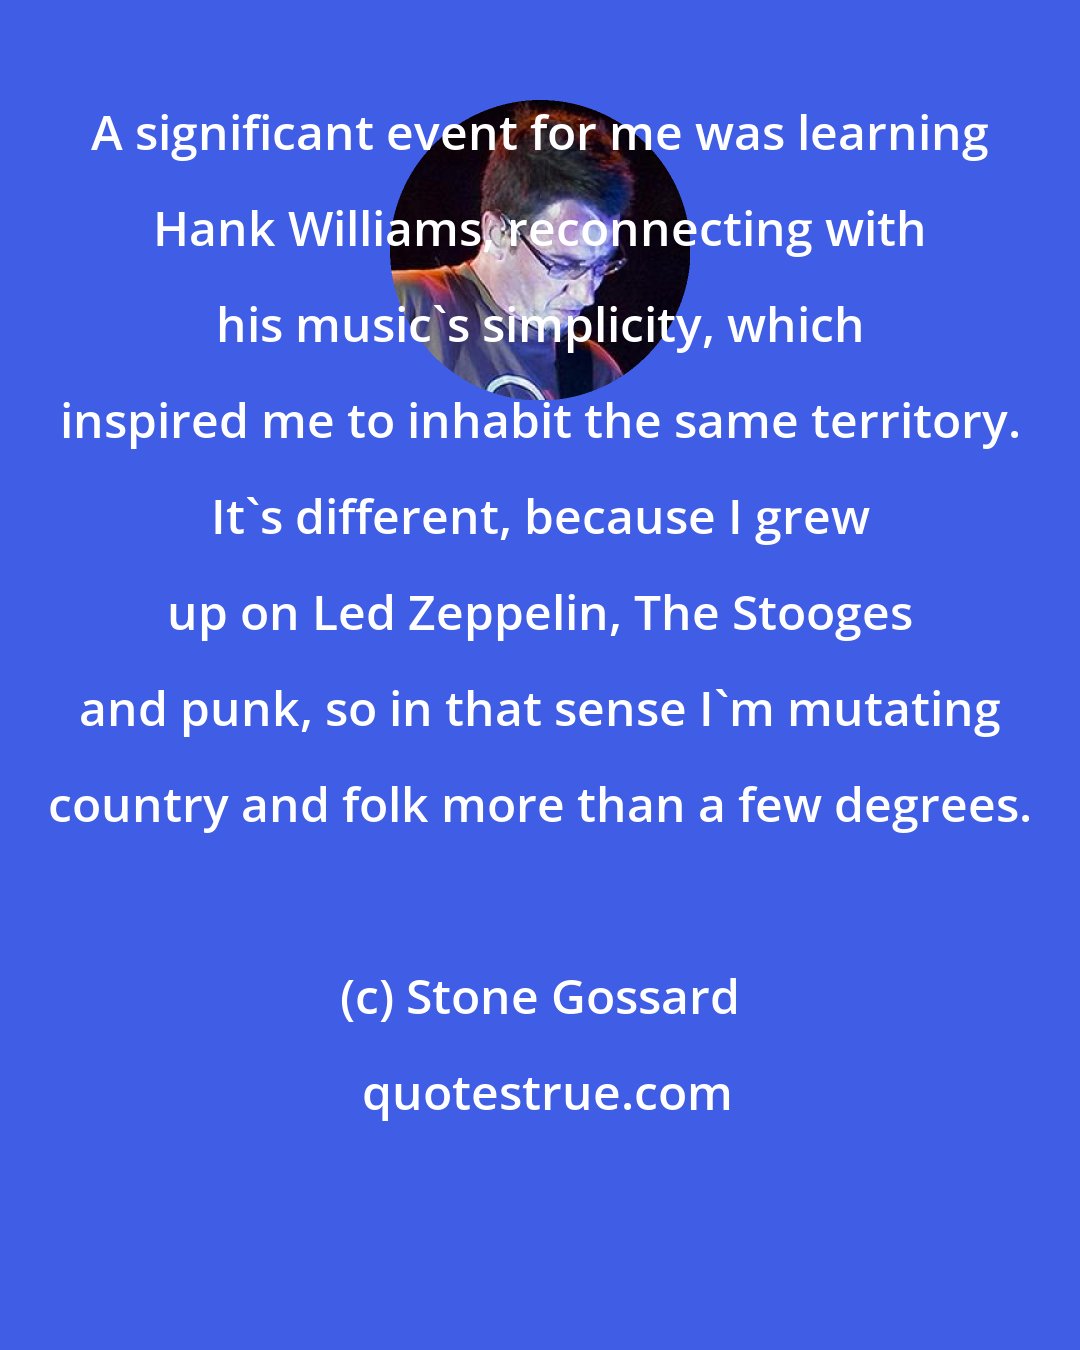 Stone Gossard: A significant event for me was learning Hank Williams, reconnecting with his music's simplicity, which inspired me to inhabit the same territory. It's different, because I grew up on Led Zeppelin, The Stooges and punk, so in that sense I'm mutating country and folk more than a few degrees.